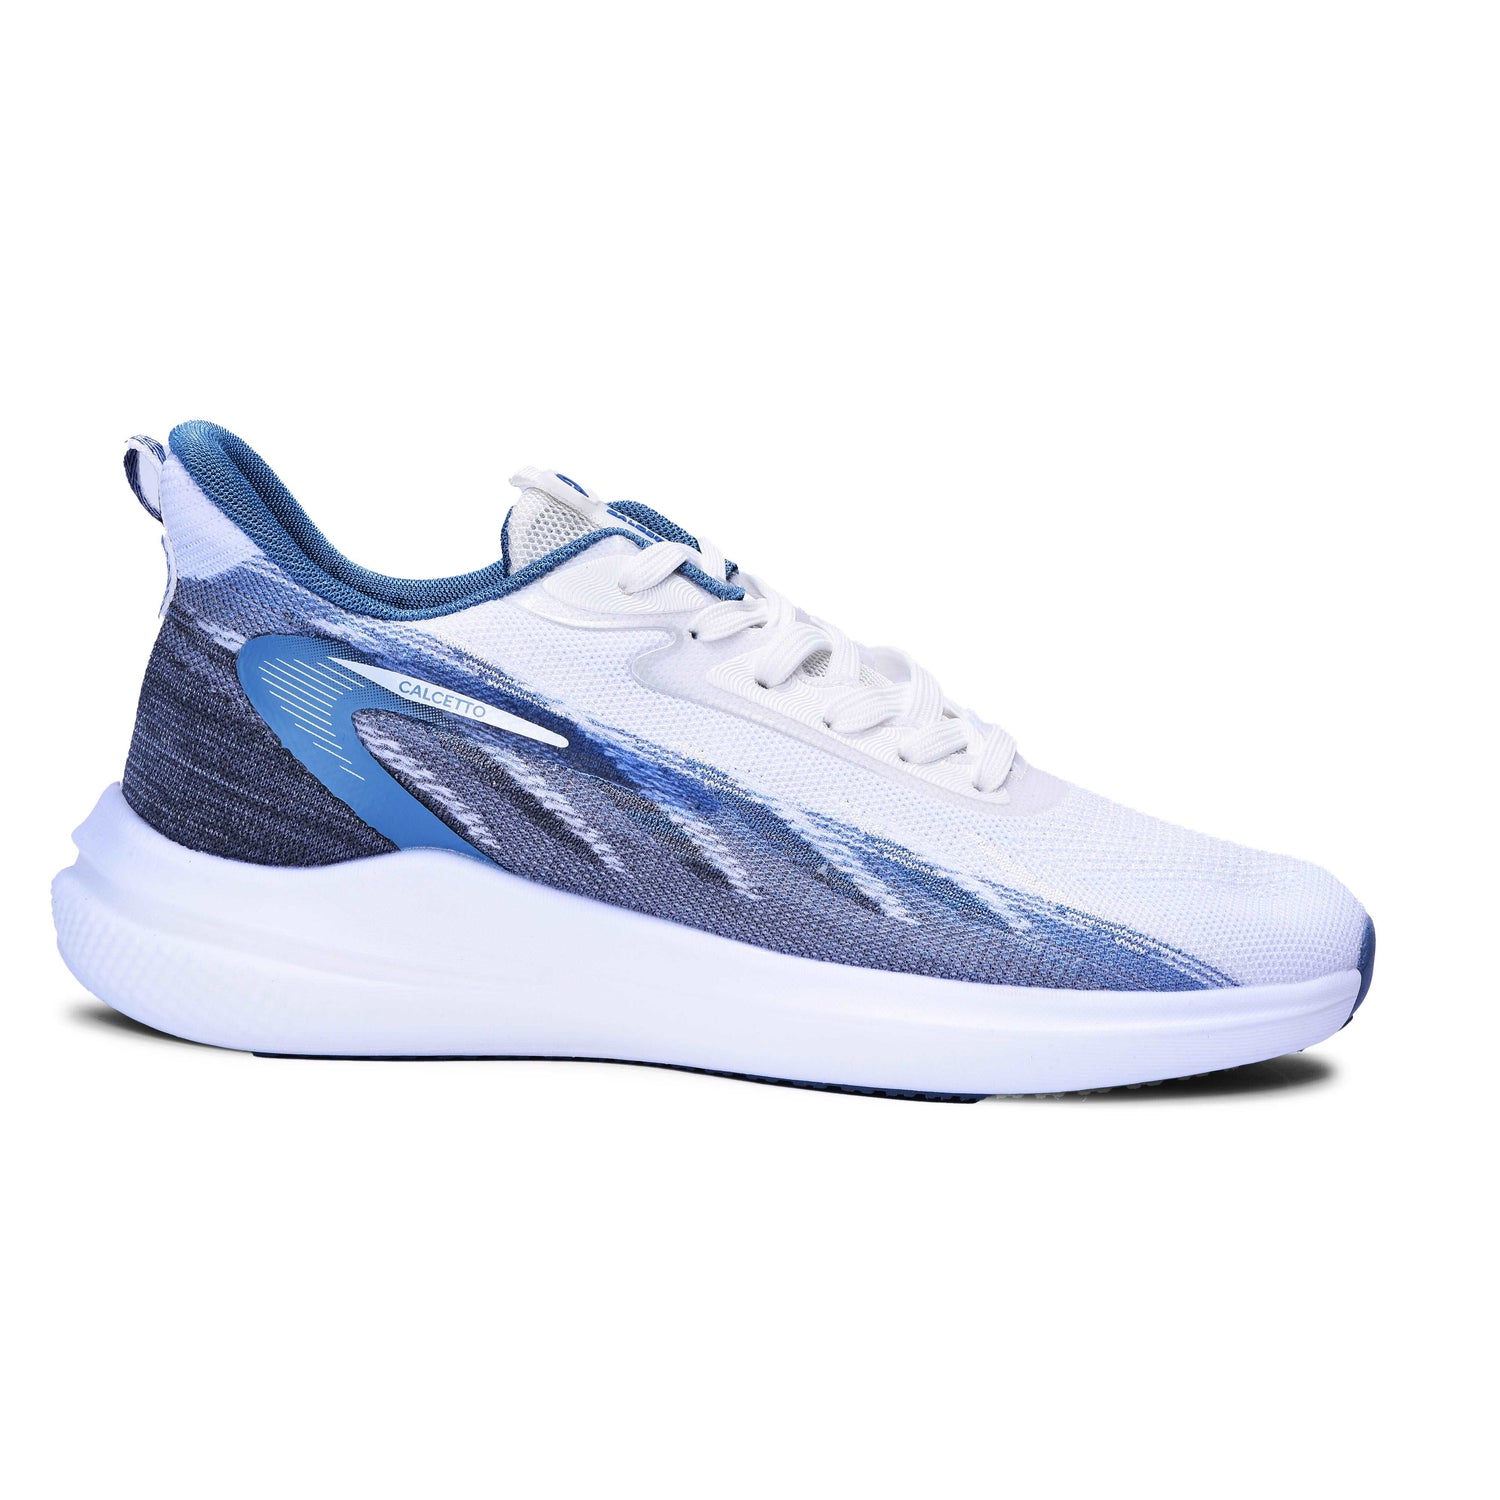 Calcetto CLT-0989 White Blue Running Sports Shoe For Men